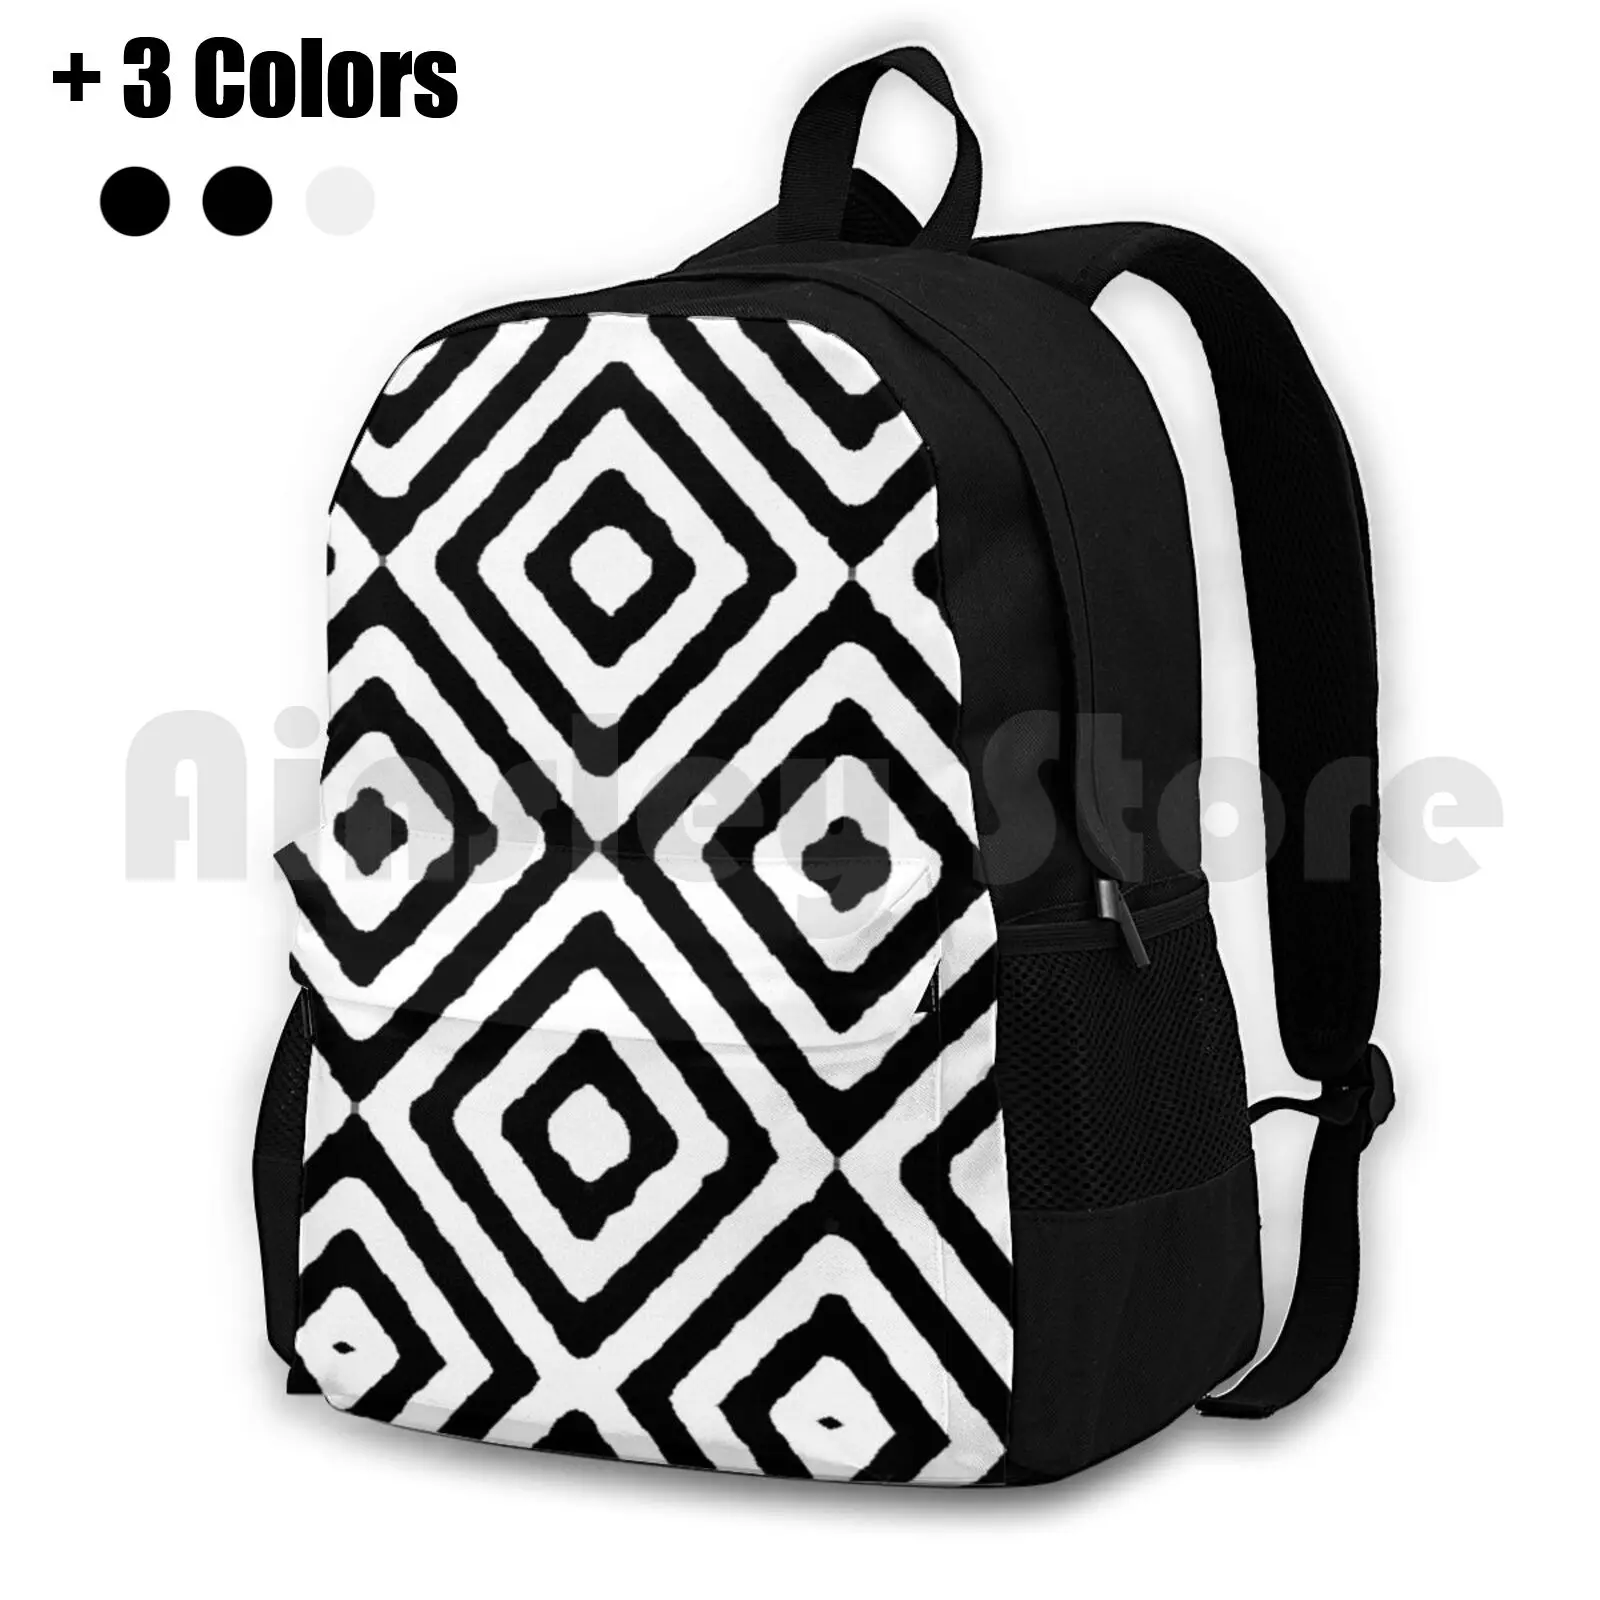 

Black And White Geometric Diamonds Pattern By Ozcushionstoo Outdoor Hiking Backpack Riding Climbing Sports Bag Black And White